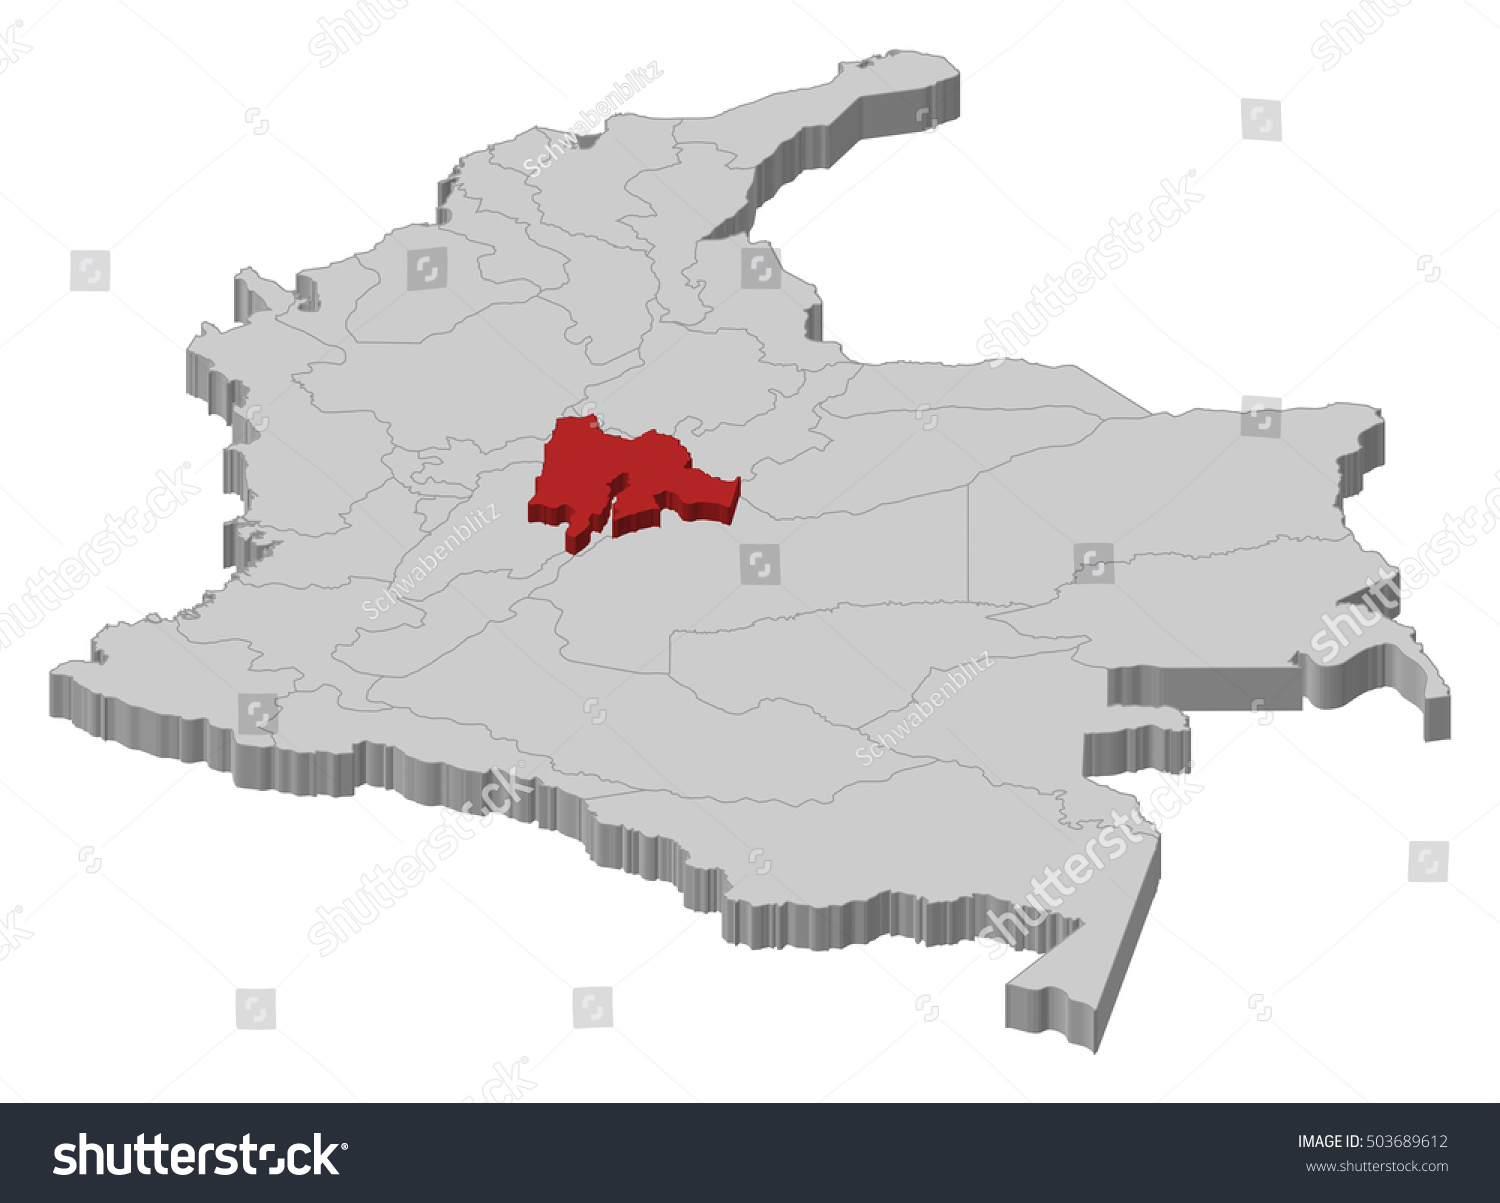 Map Colombia Cundinamarca 3dillustration Stock Vector Royalty Free 503689612 Shutterstock 